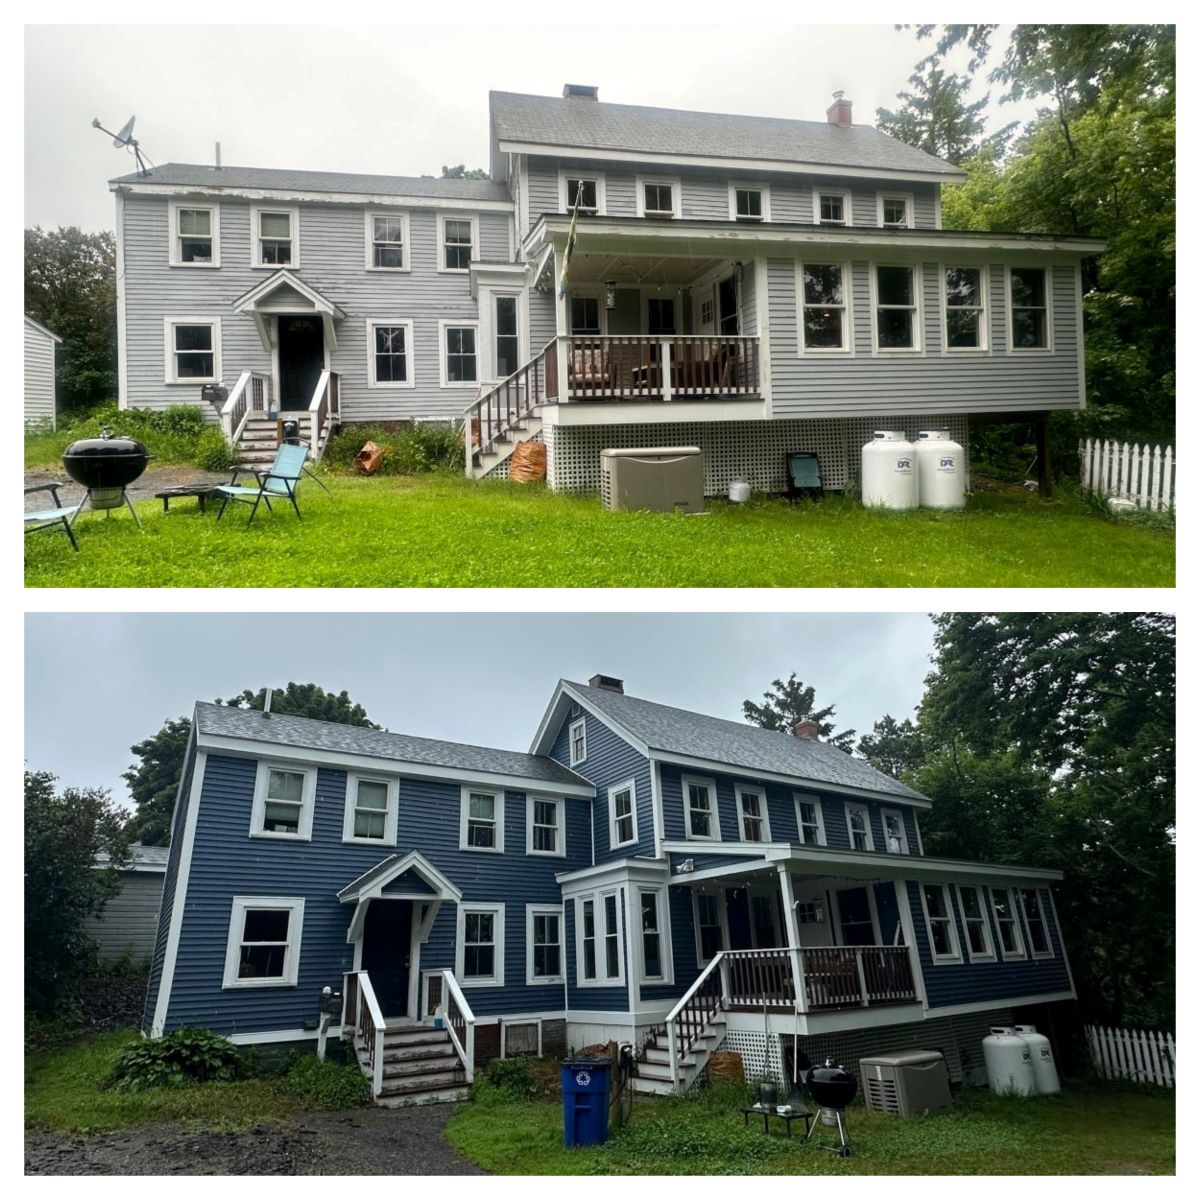 Vinyl Siding upgrade on this home in Bath Maine